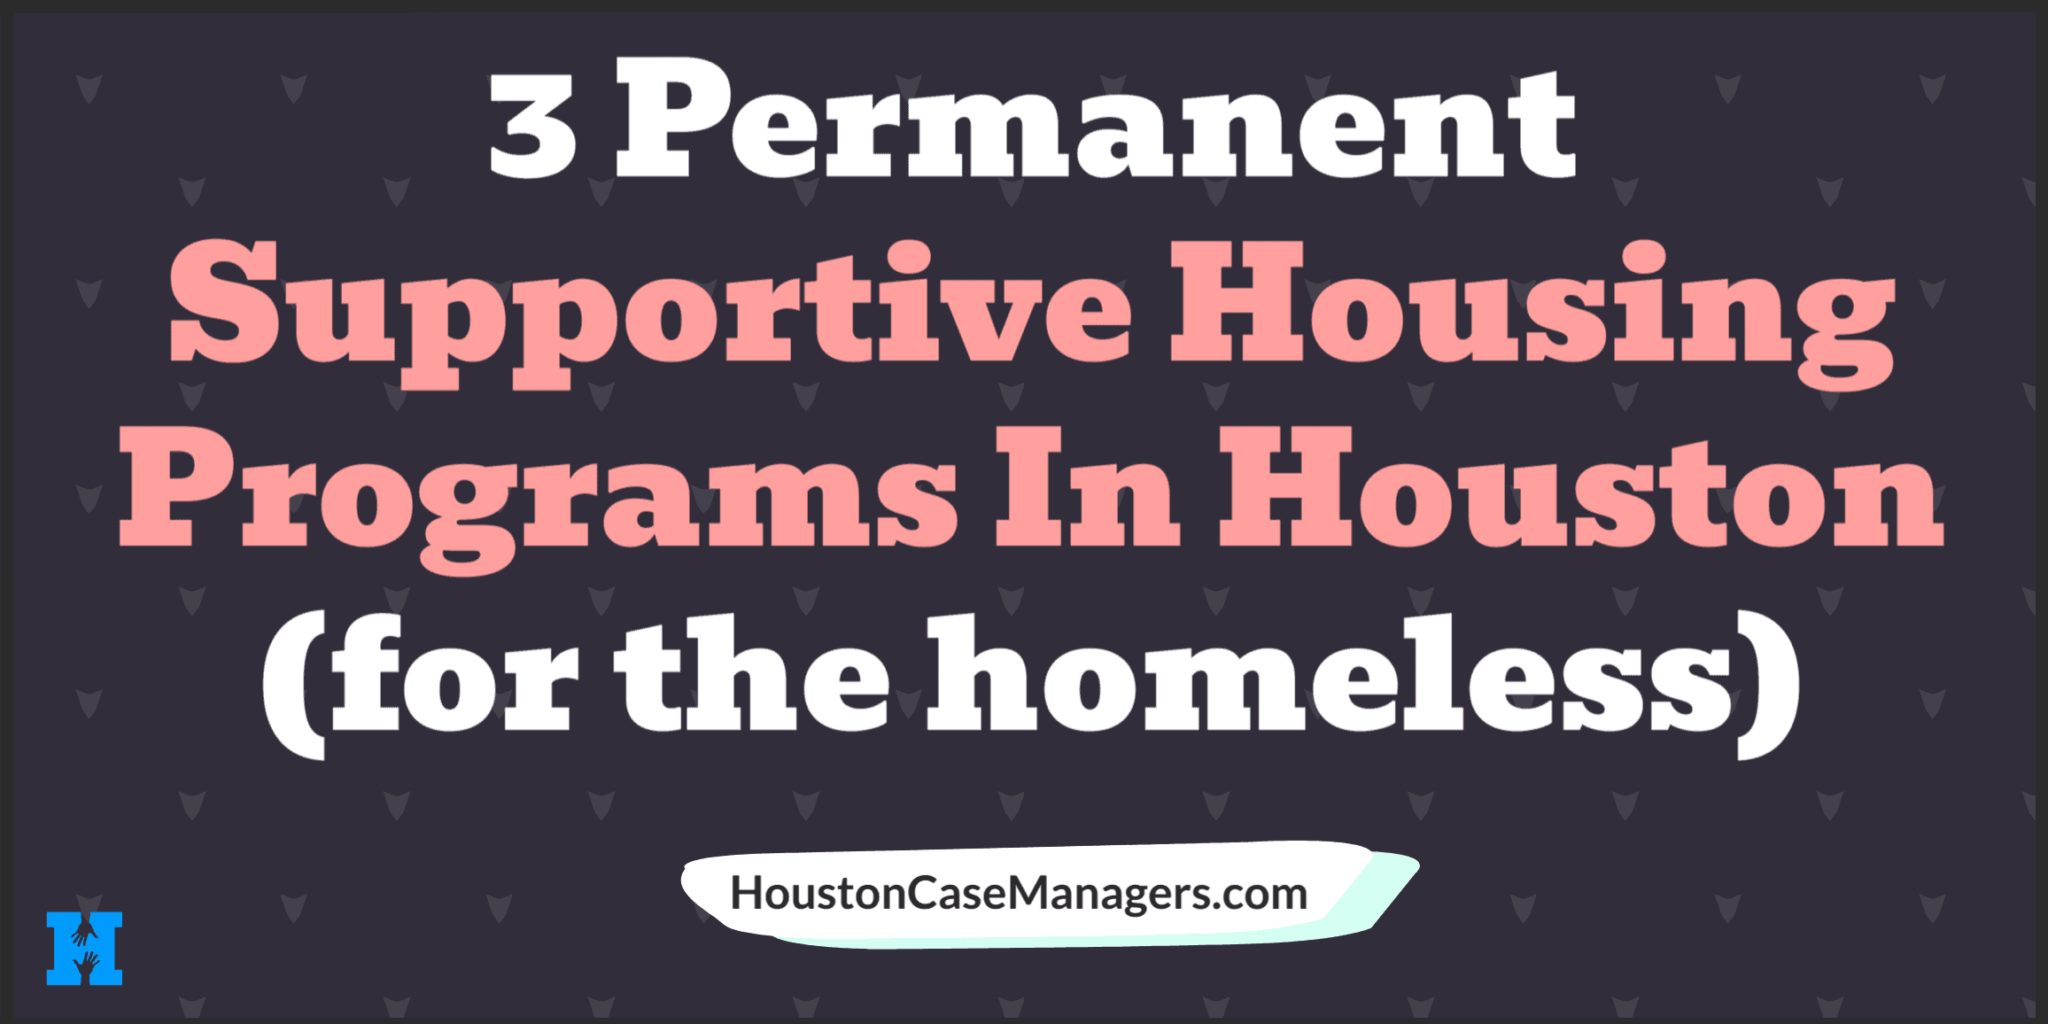 3 Permanent Supportive Housing Programs In Houston For The Homeless 6919